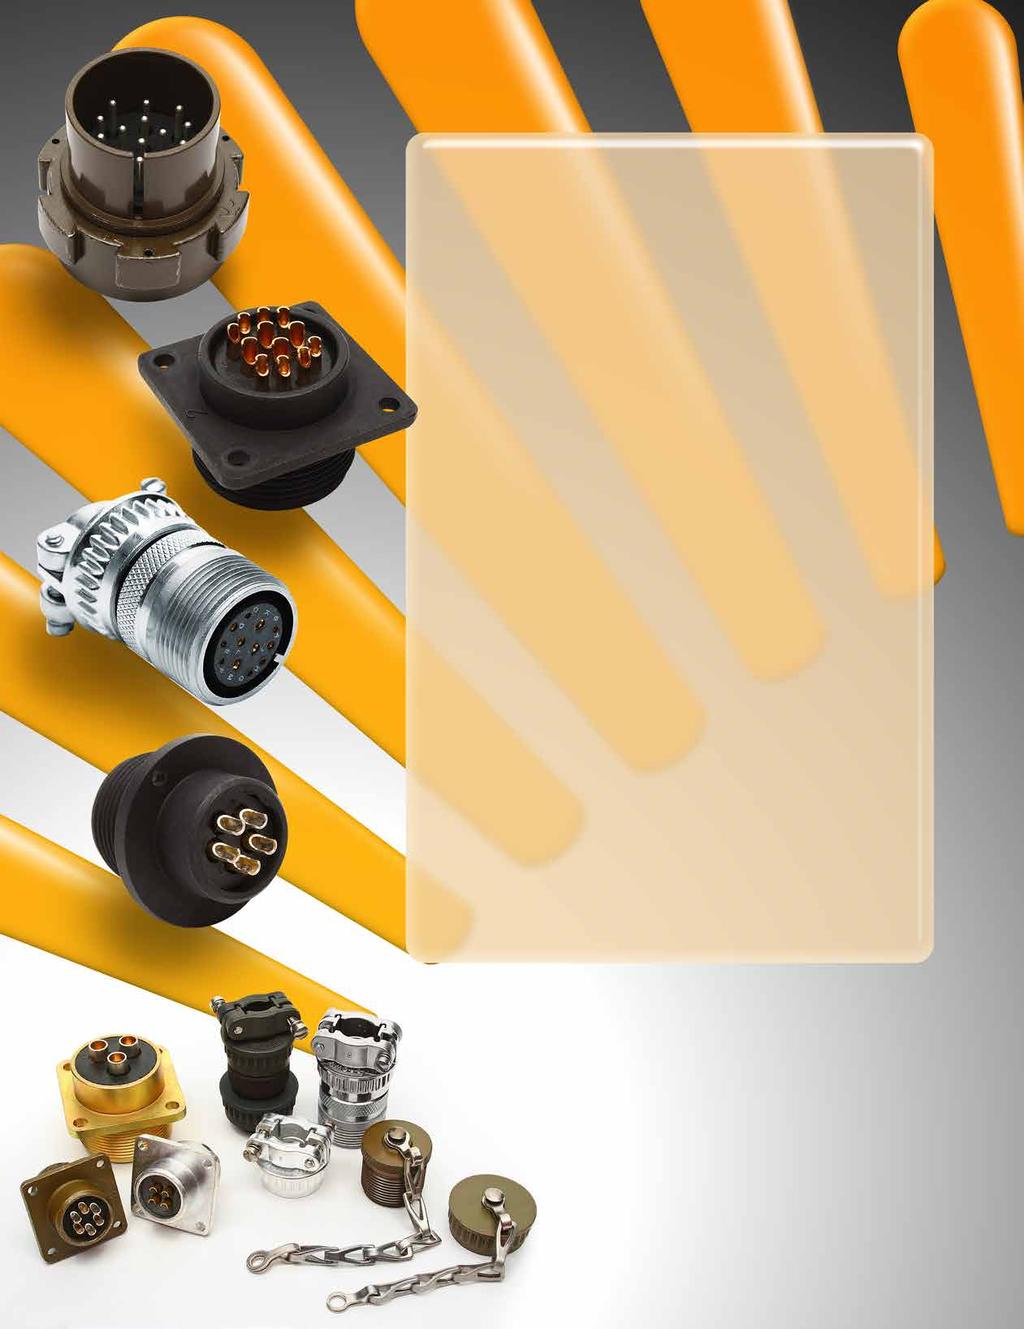 Crown Connector has been designing and producing the highest quality connectors since 1972. Our connectors are used in a variety of industrial markets, military ground support and heavy equipment.